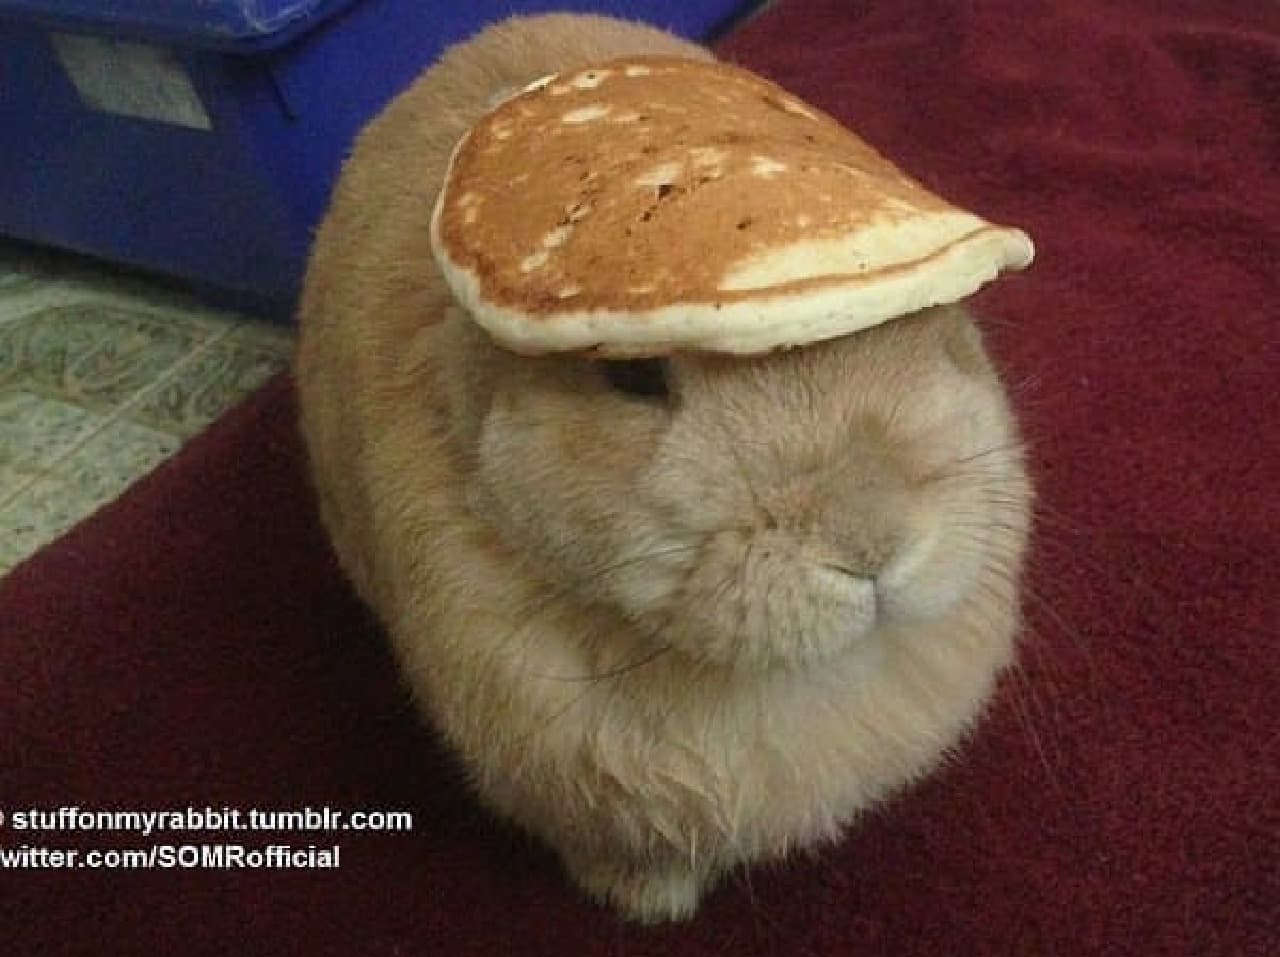 This is a pancake photo that was first posted on Twitter